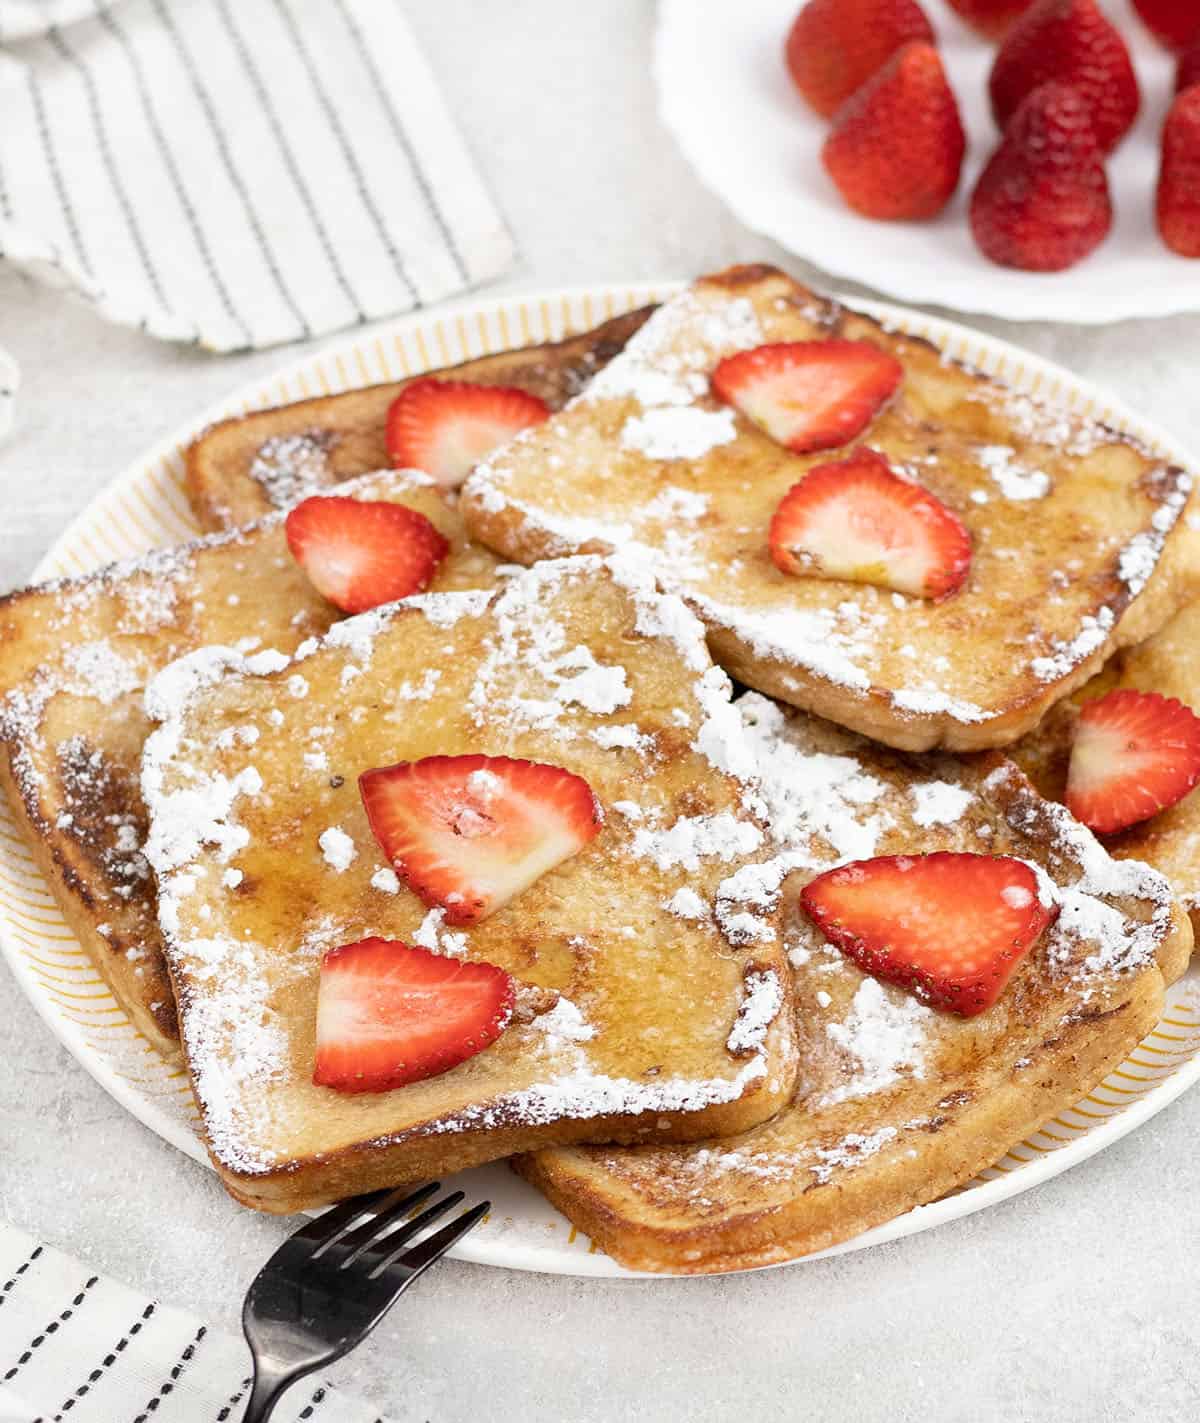 Sourdough French Toast topped with strawberries and powdered sugar.